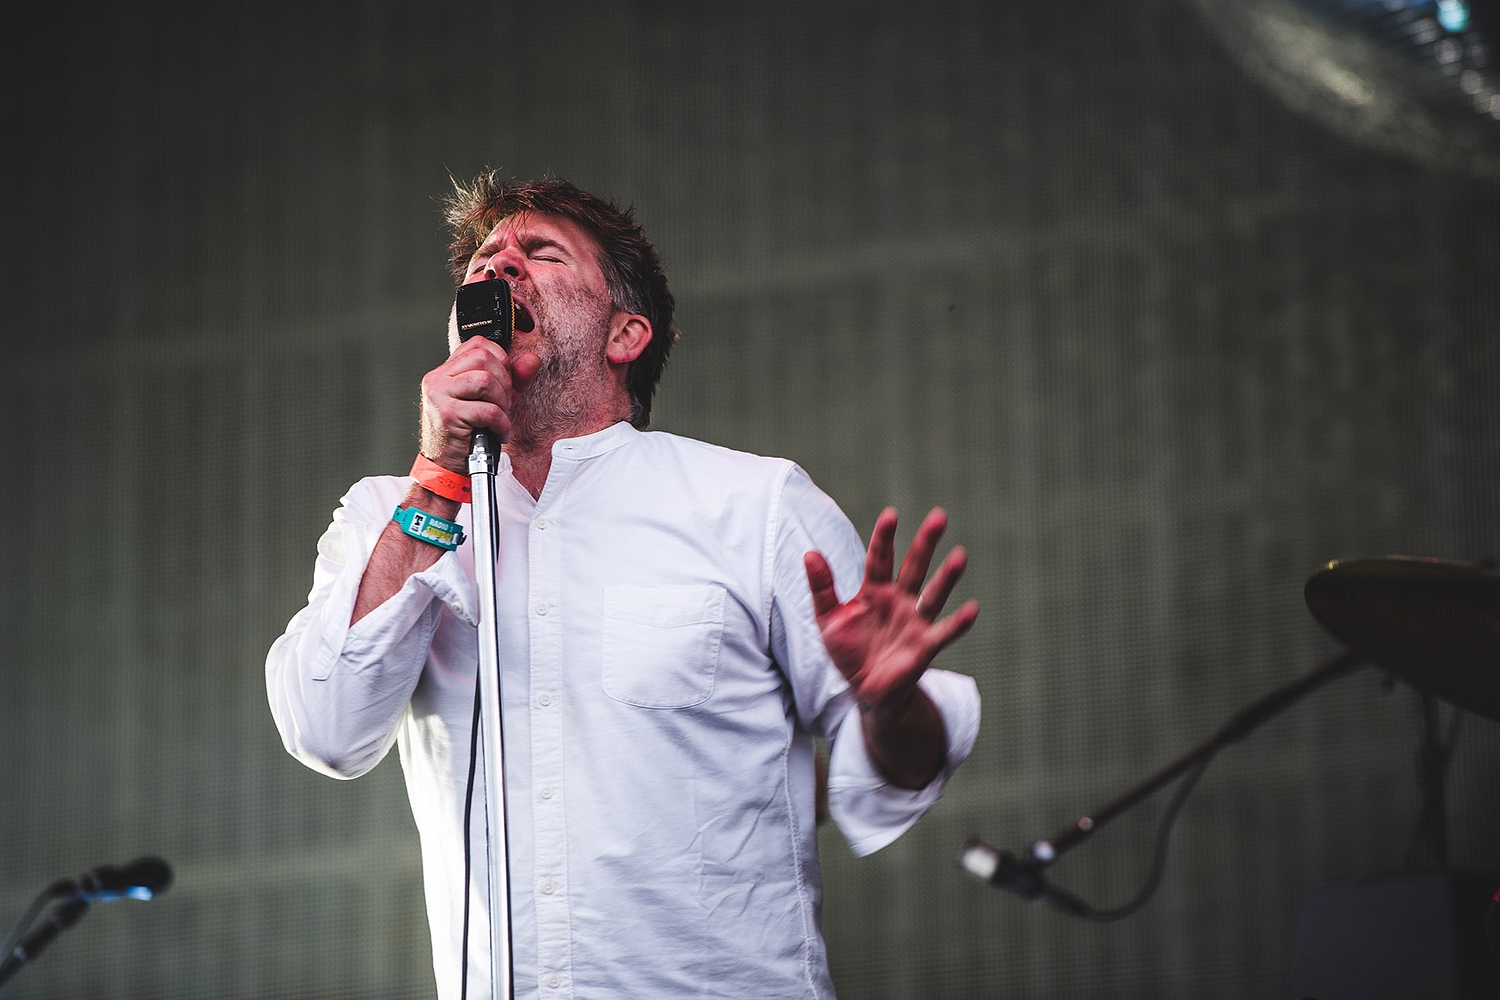 LCD Soundsystem cover Chic’s ‘I Want Your Love’ for Spotify Singles session